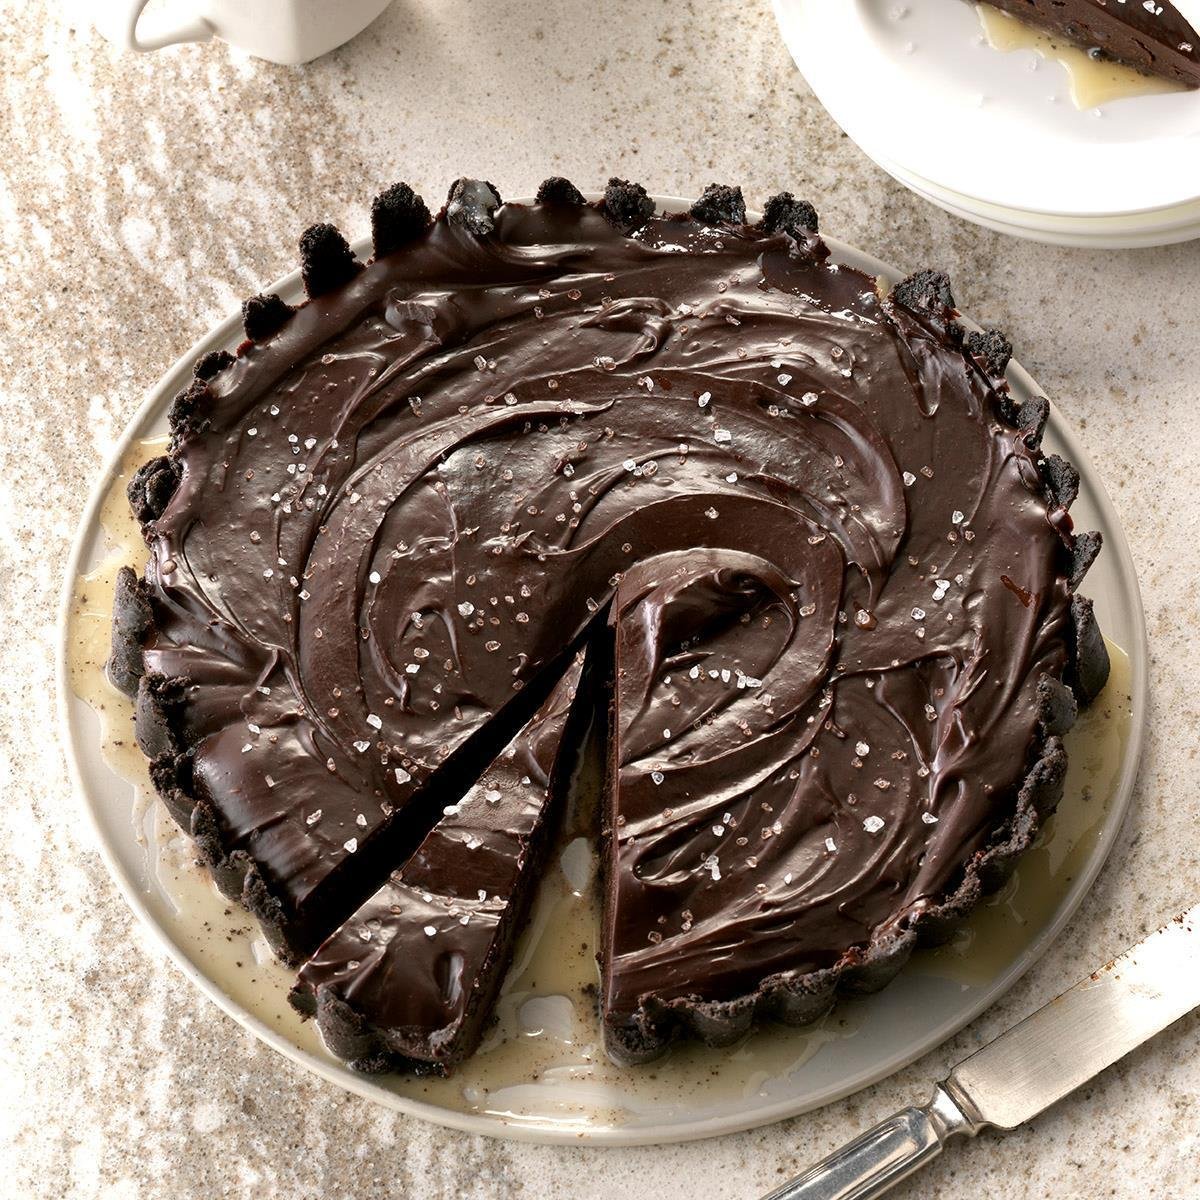 Satisfy Your Sweet Tooth with This Decadent Dark Chocolate Tart Recipe